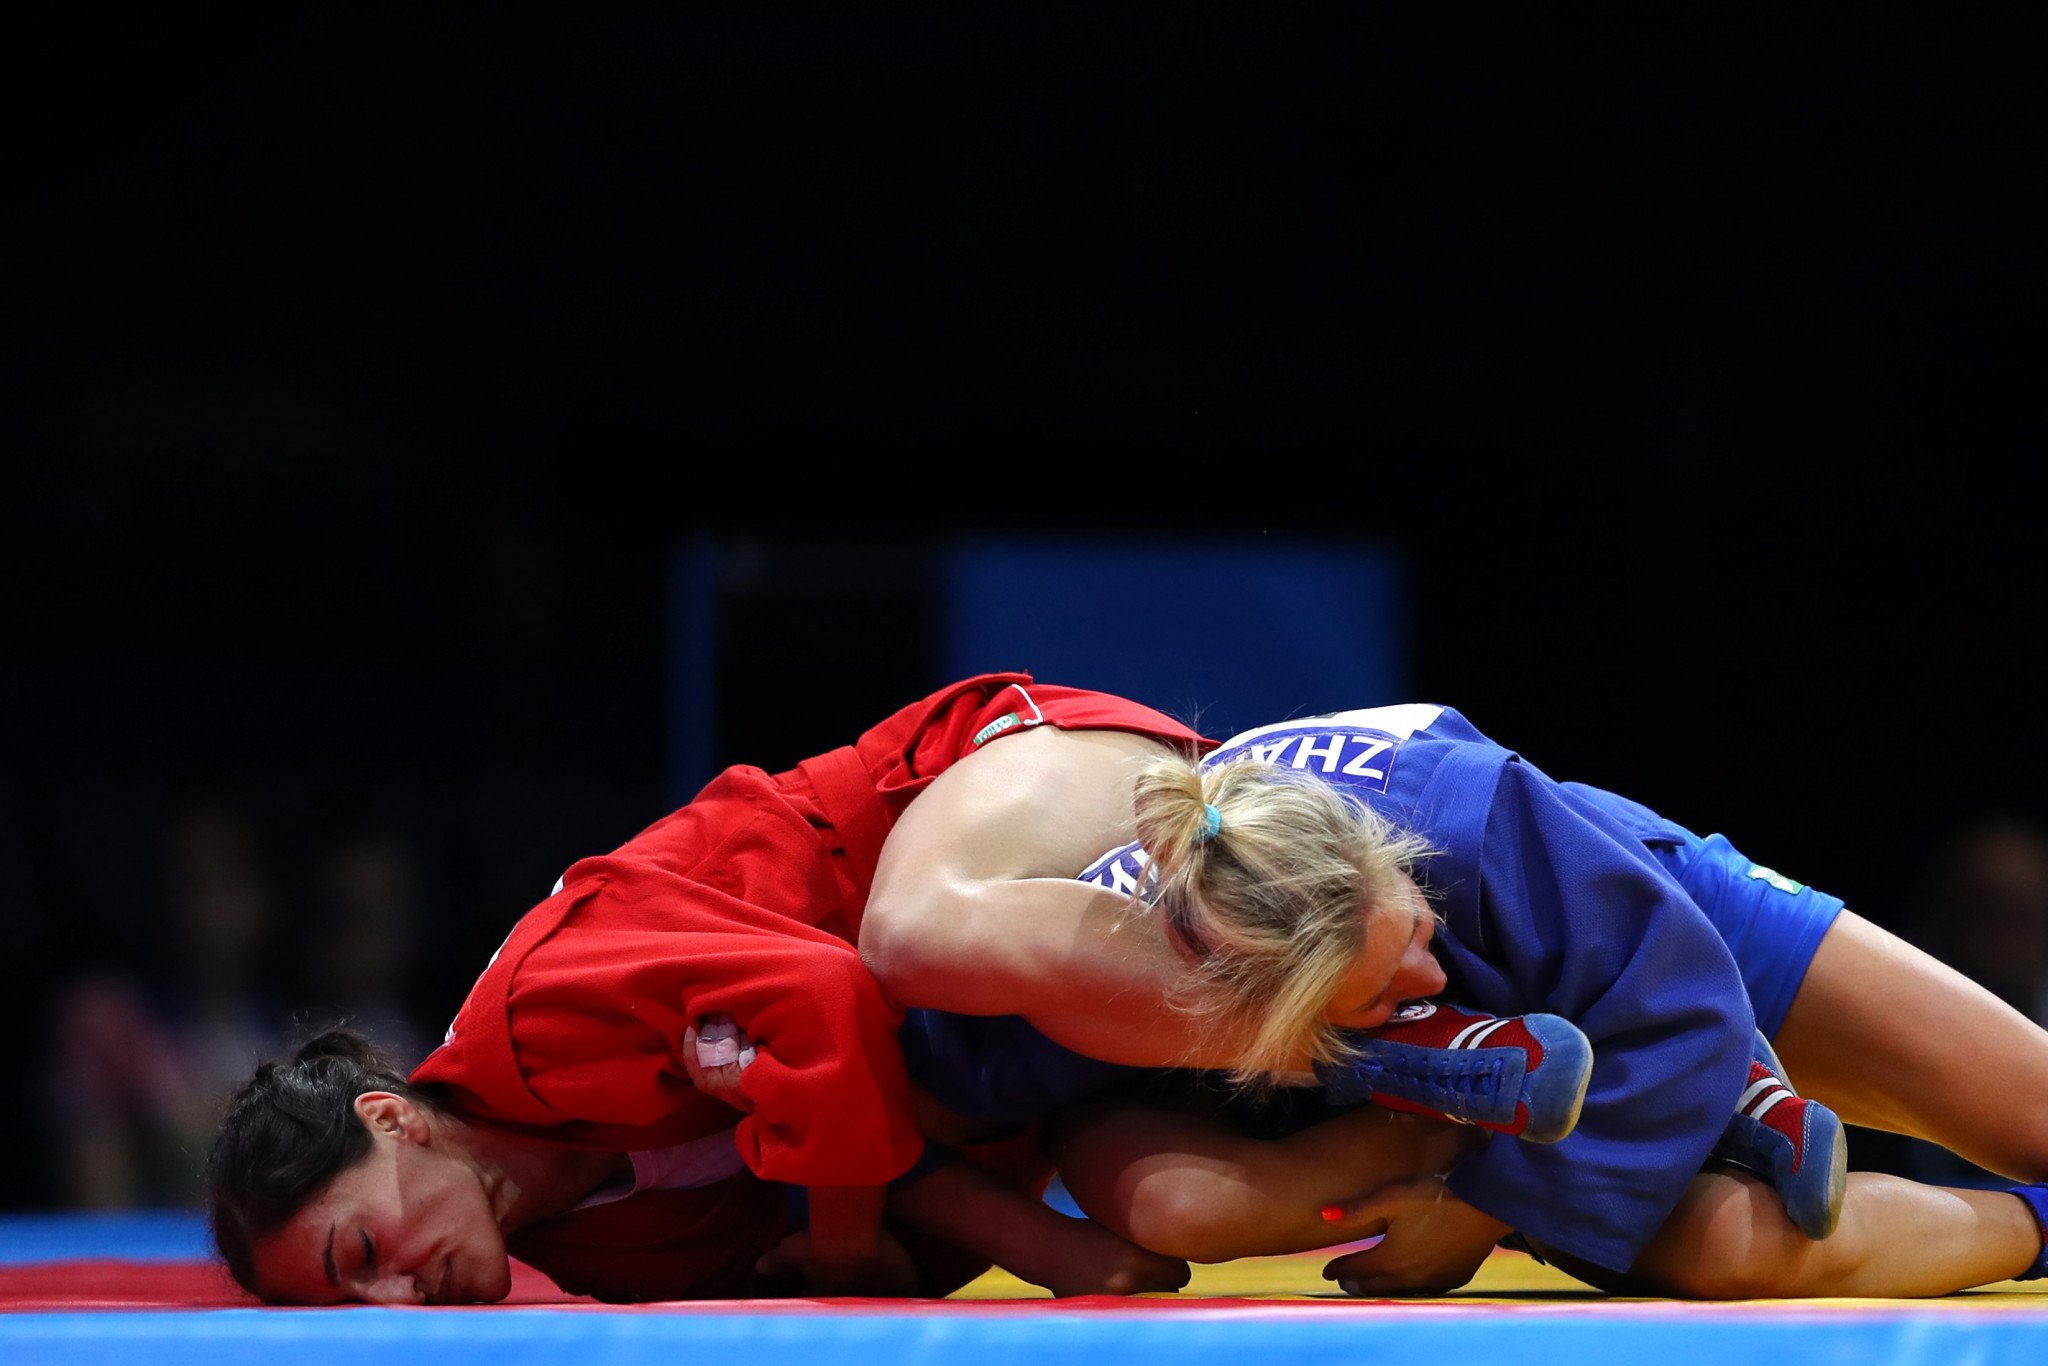 A World Sambo Super Cup is also planned for Moscow next year ©Getty Images